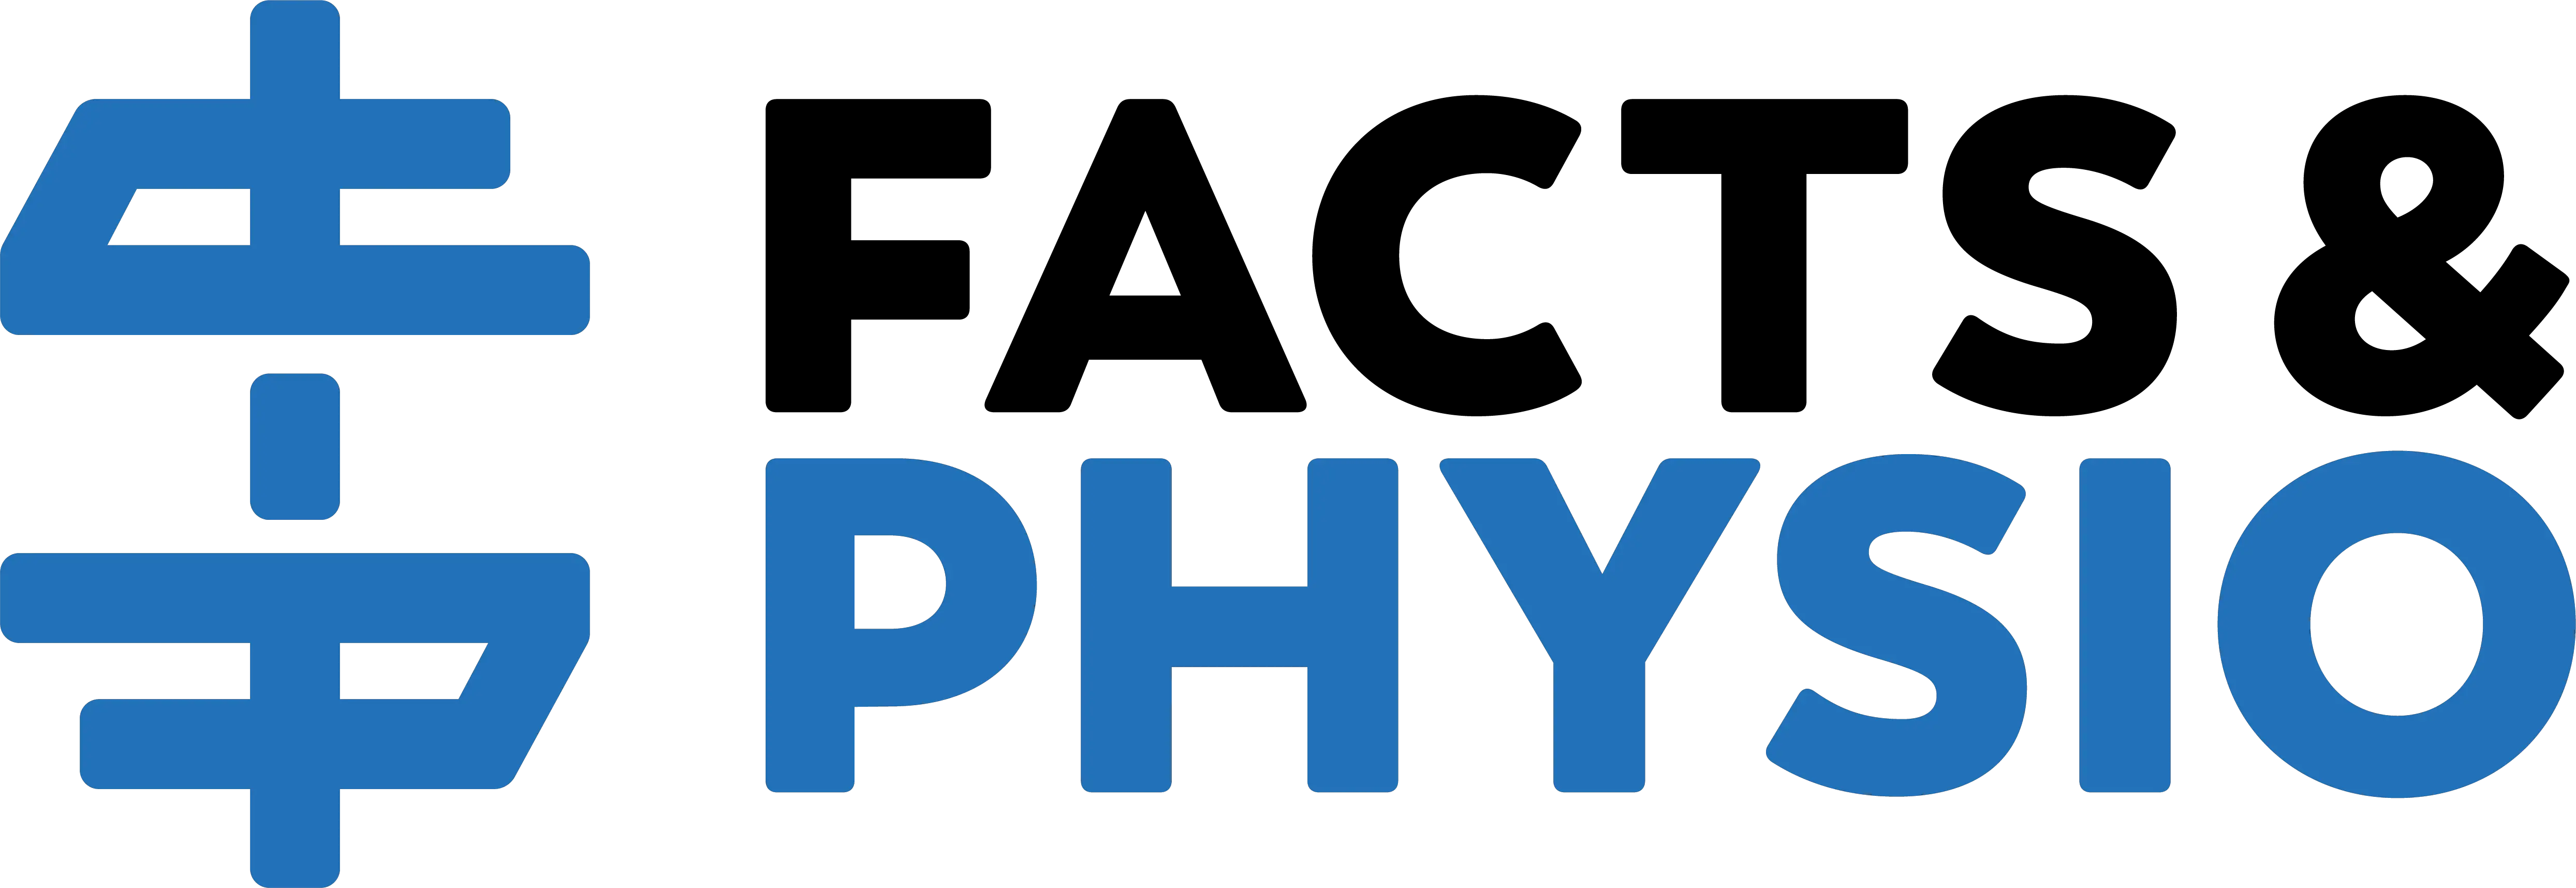 Facts-and-Physio_LOGO-COLOR